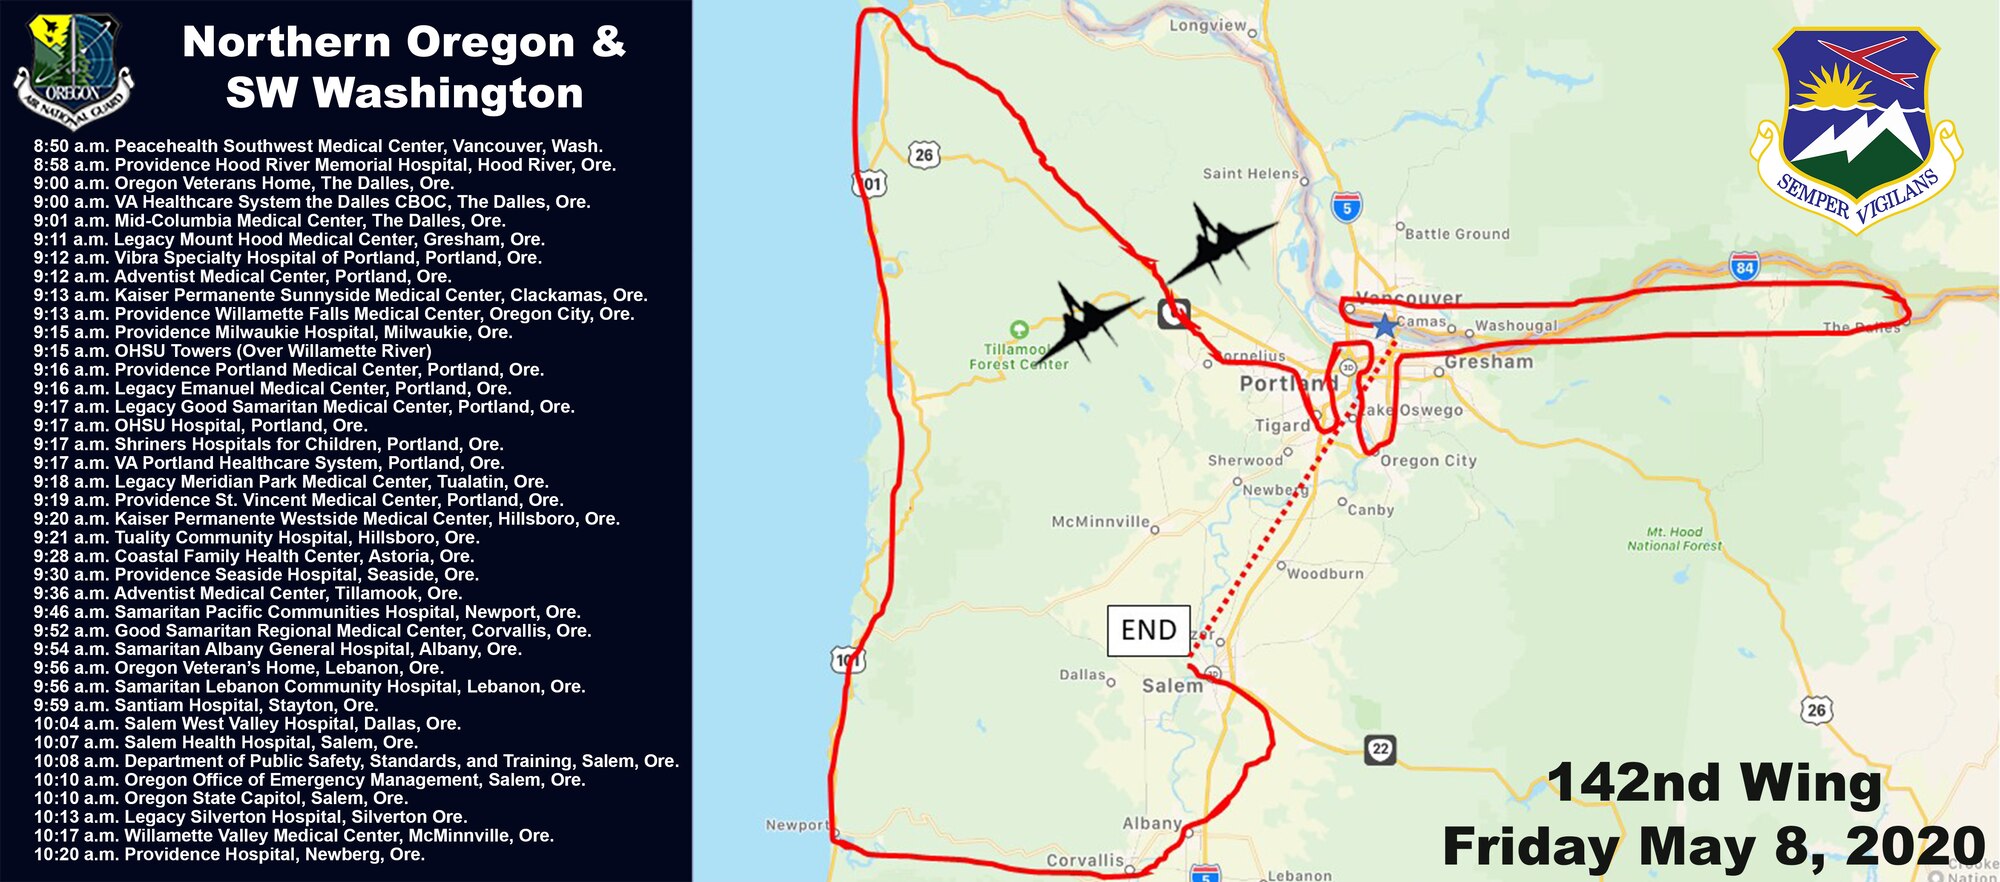 Northern Oregon and SW Washington Flyovers for COVID-19, America Strong